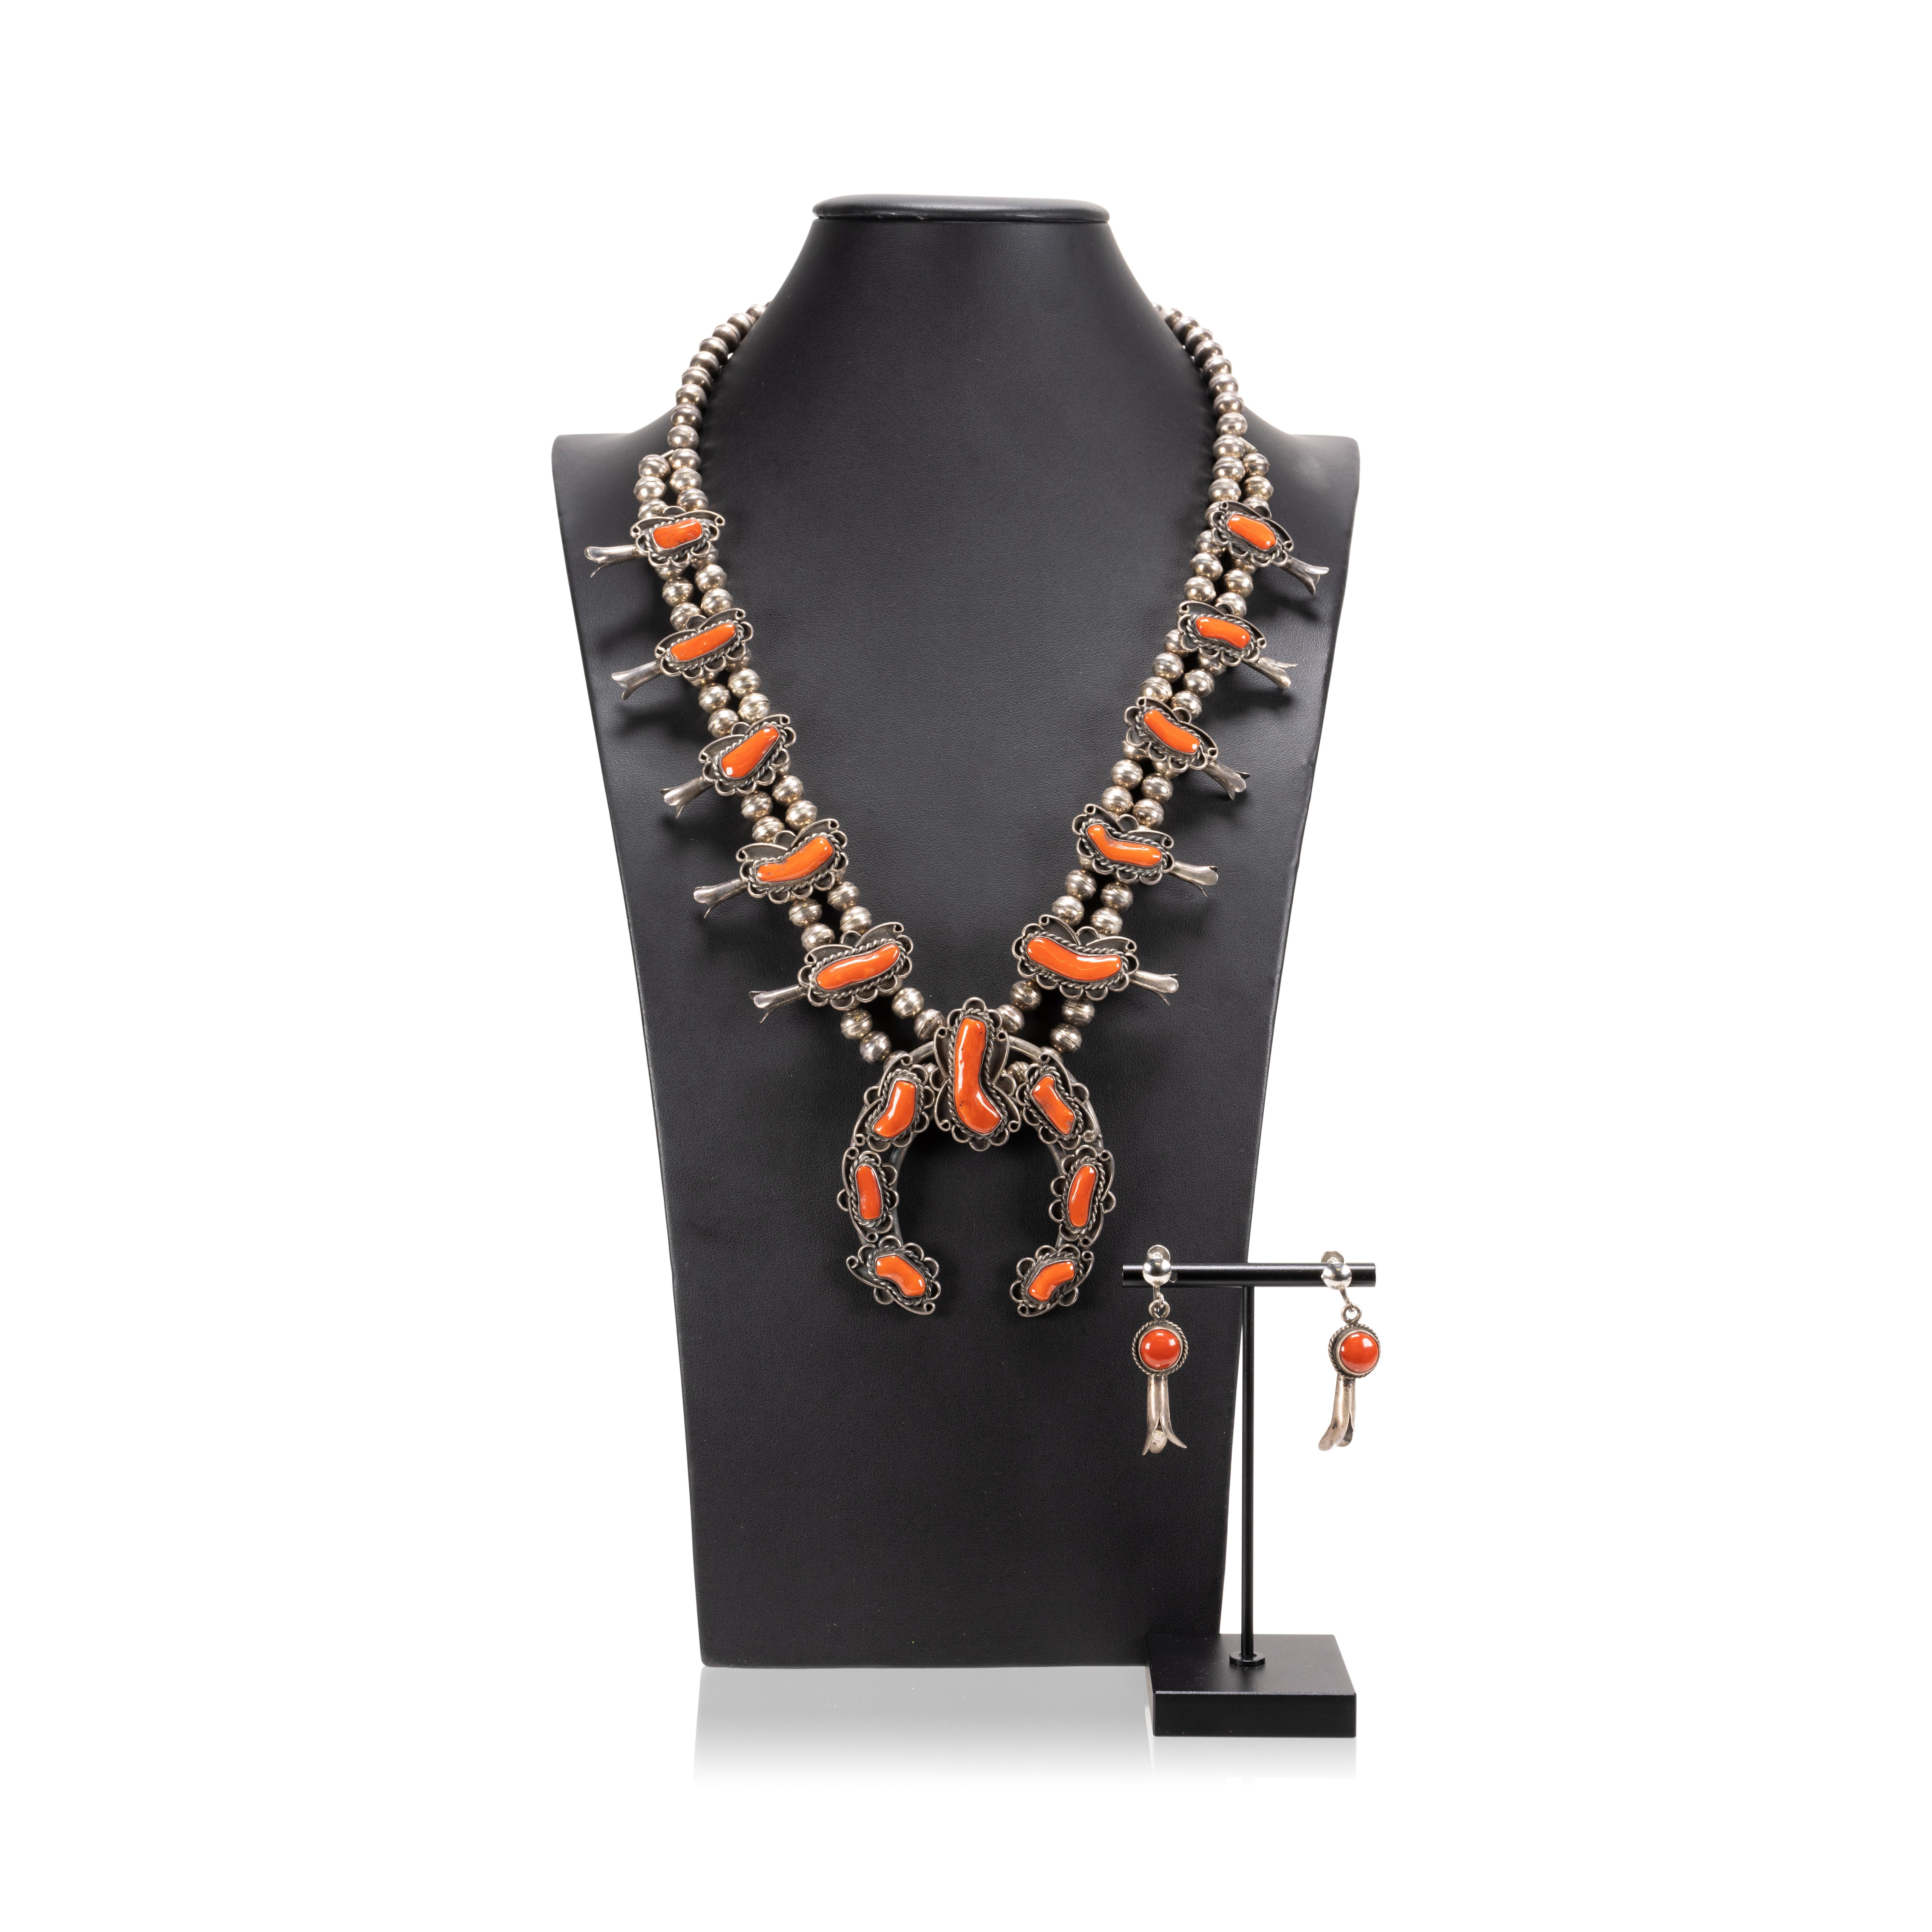 Navajo coral and sterling silver squash blossom necklace featuring a classic naja with seven beautiful coral cabochons accented by twisted rope and light hand stamped designs. The petal blossoms along the neck feature more exceptional, high-grade